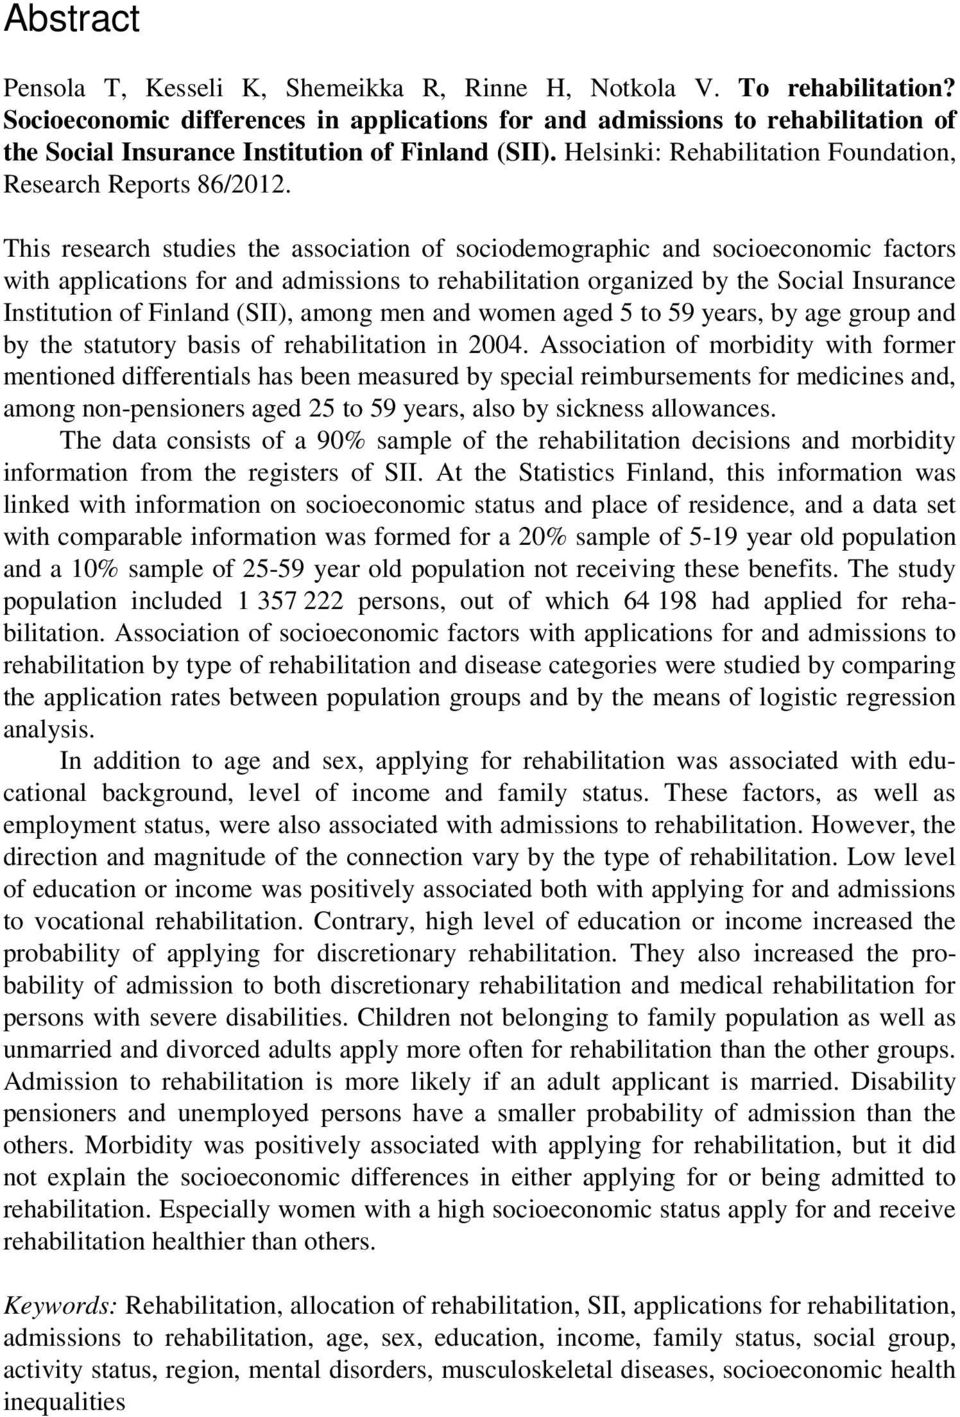 This research studies the association of sociodemographic and socioeconomic factors with applications for and admissions to rehabilitation organized by the Social Insurance Institution of Finland